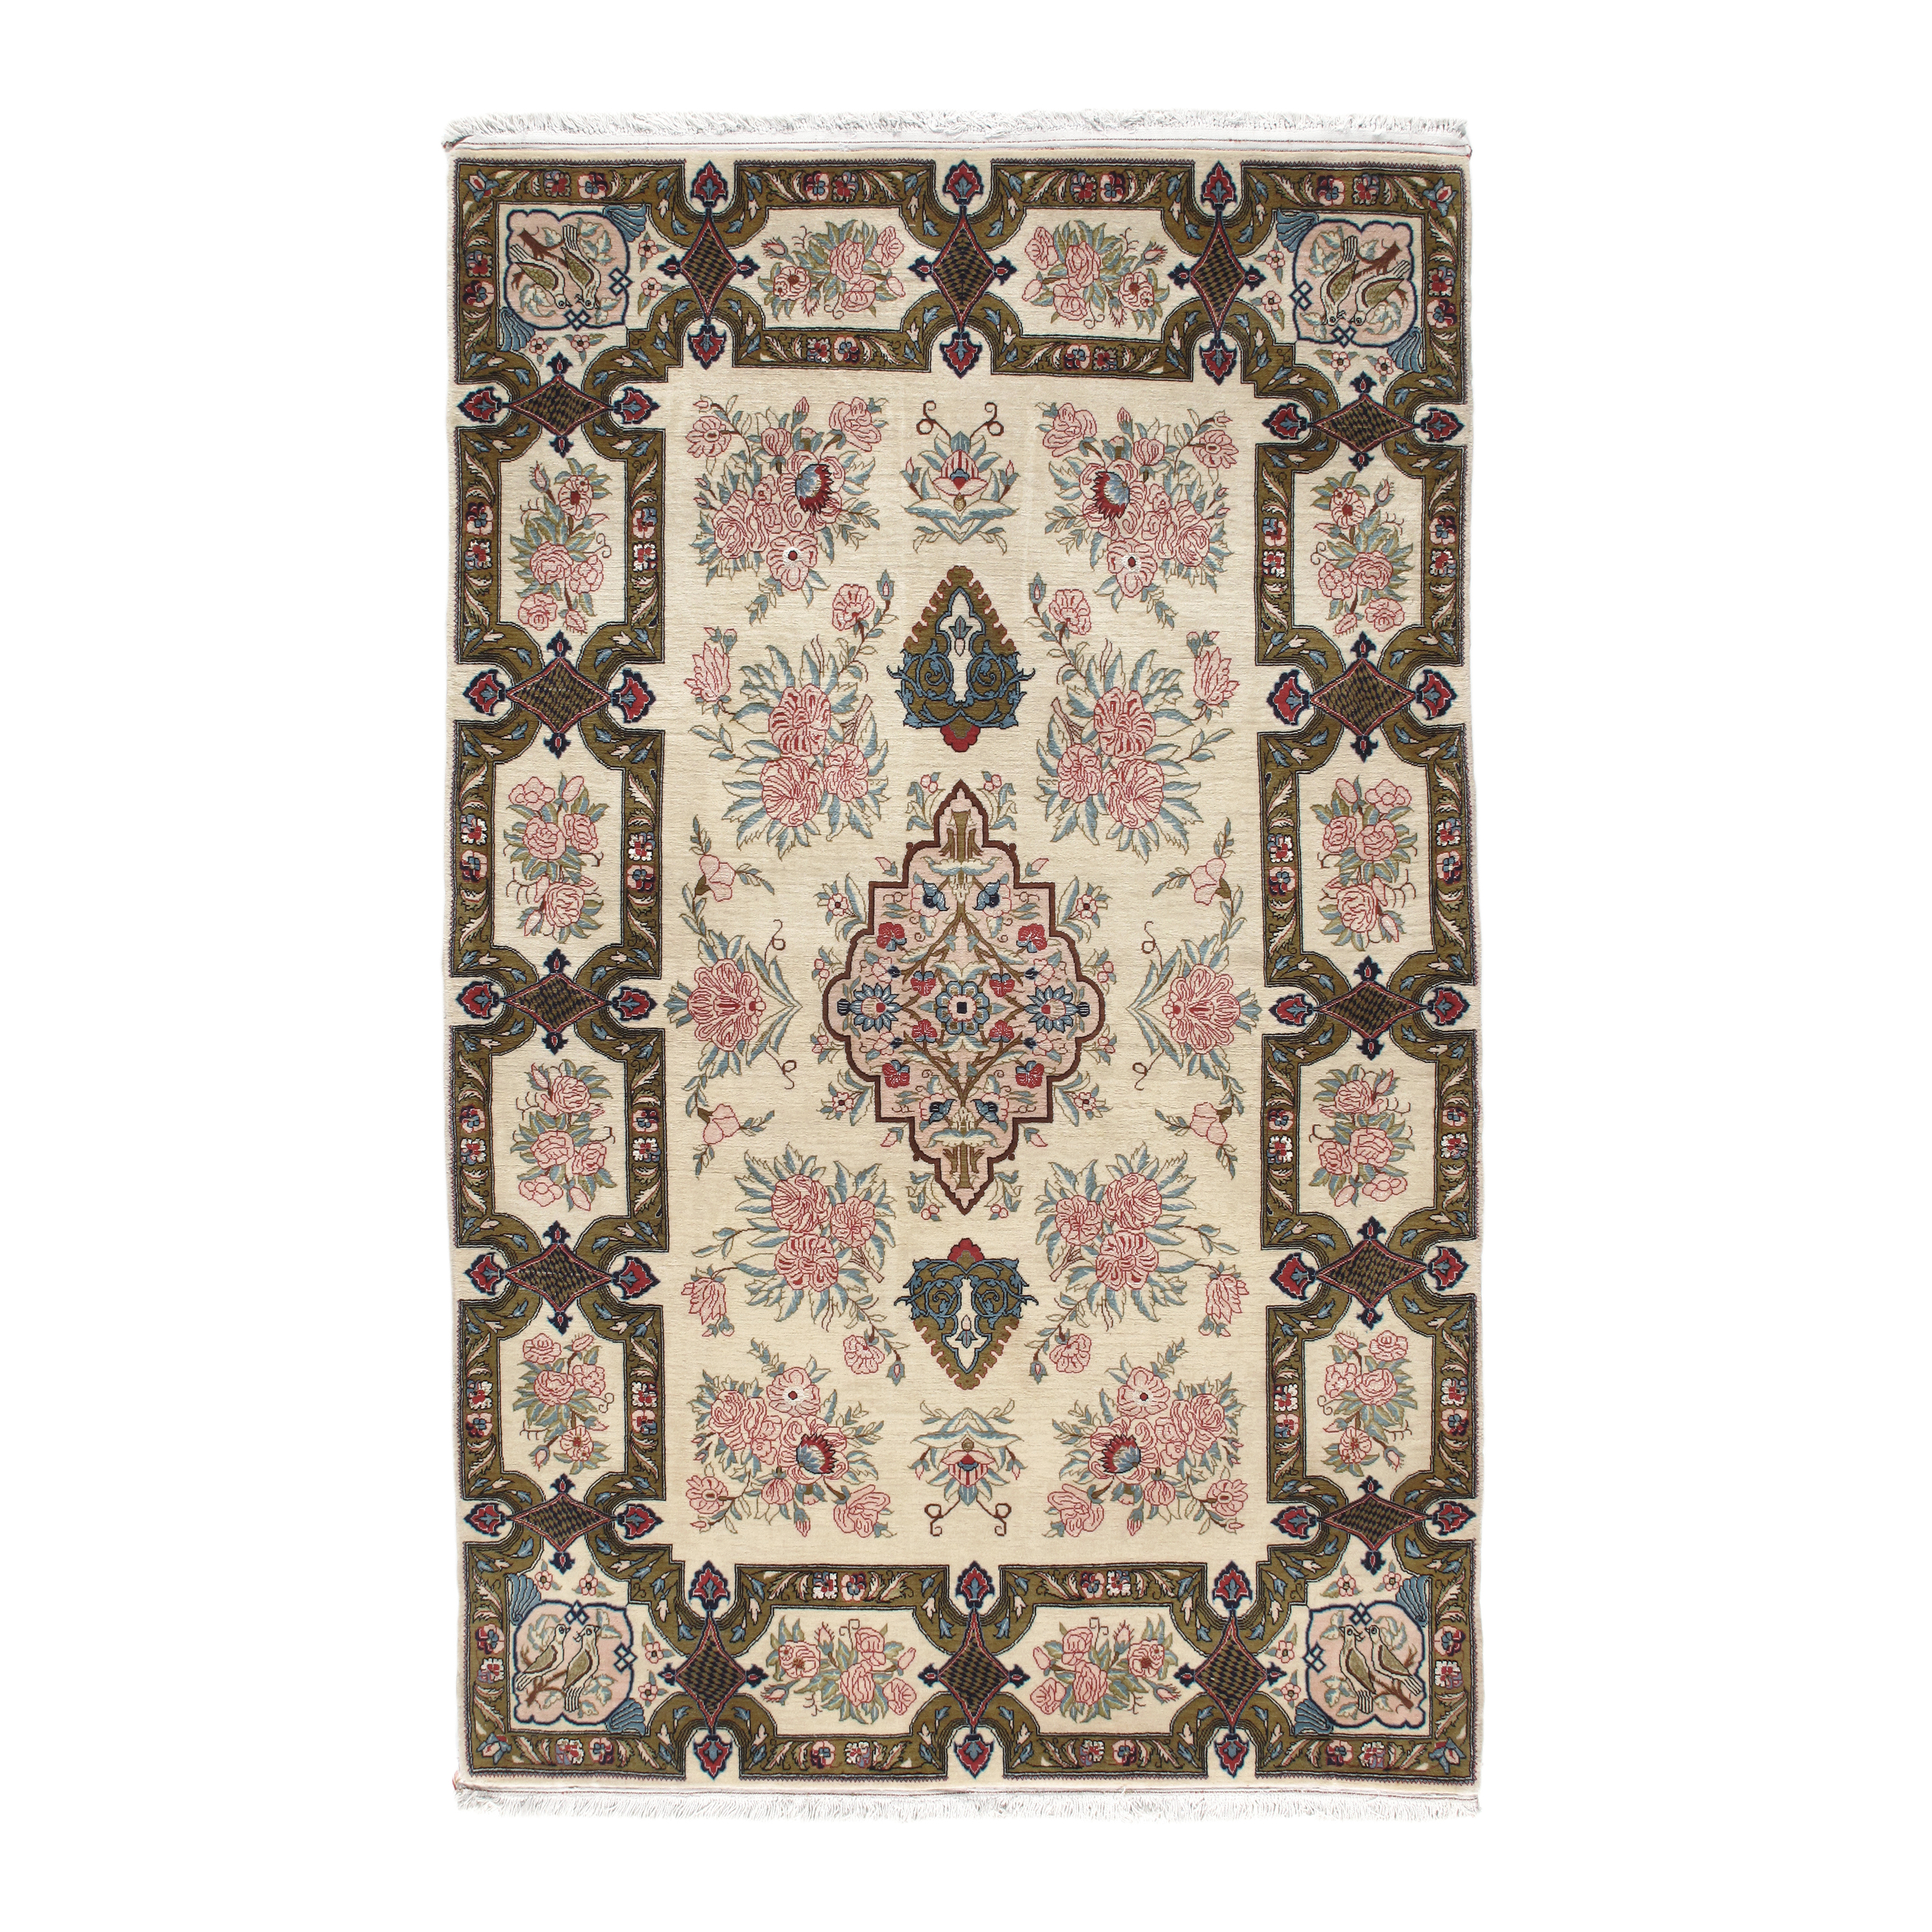 This Persian Qum rug was made of Persian wool and silk details.